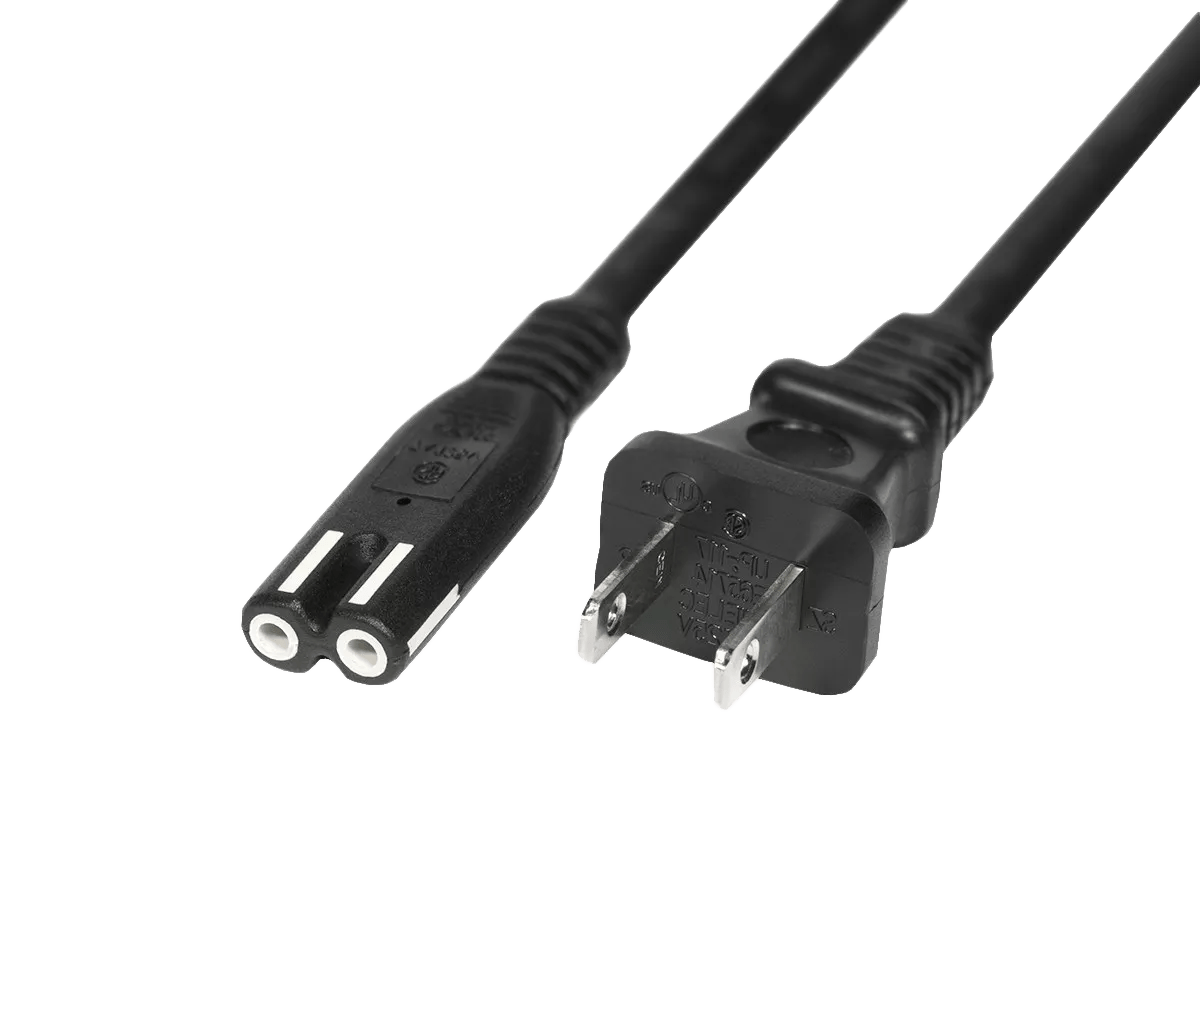 AC POWER CORD REPLACEMENT STEREO CABLE for BOSE COMPANION 3,5 SPEAKERS